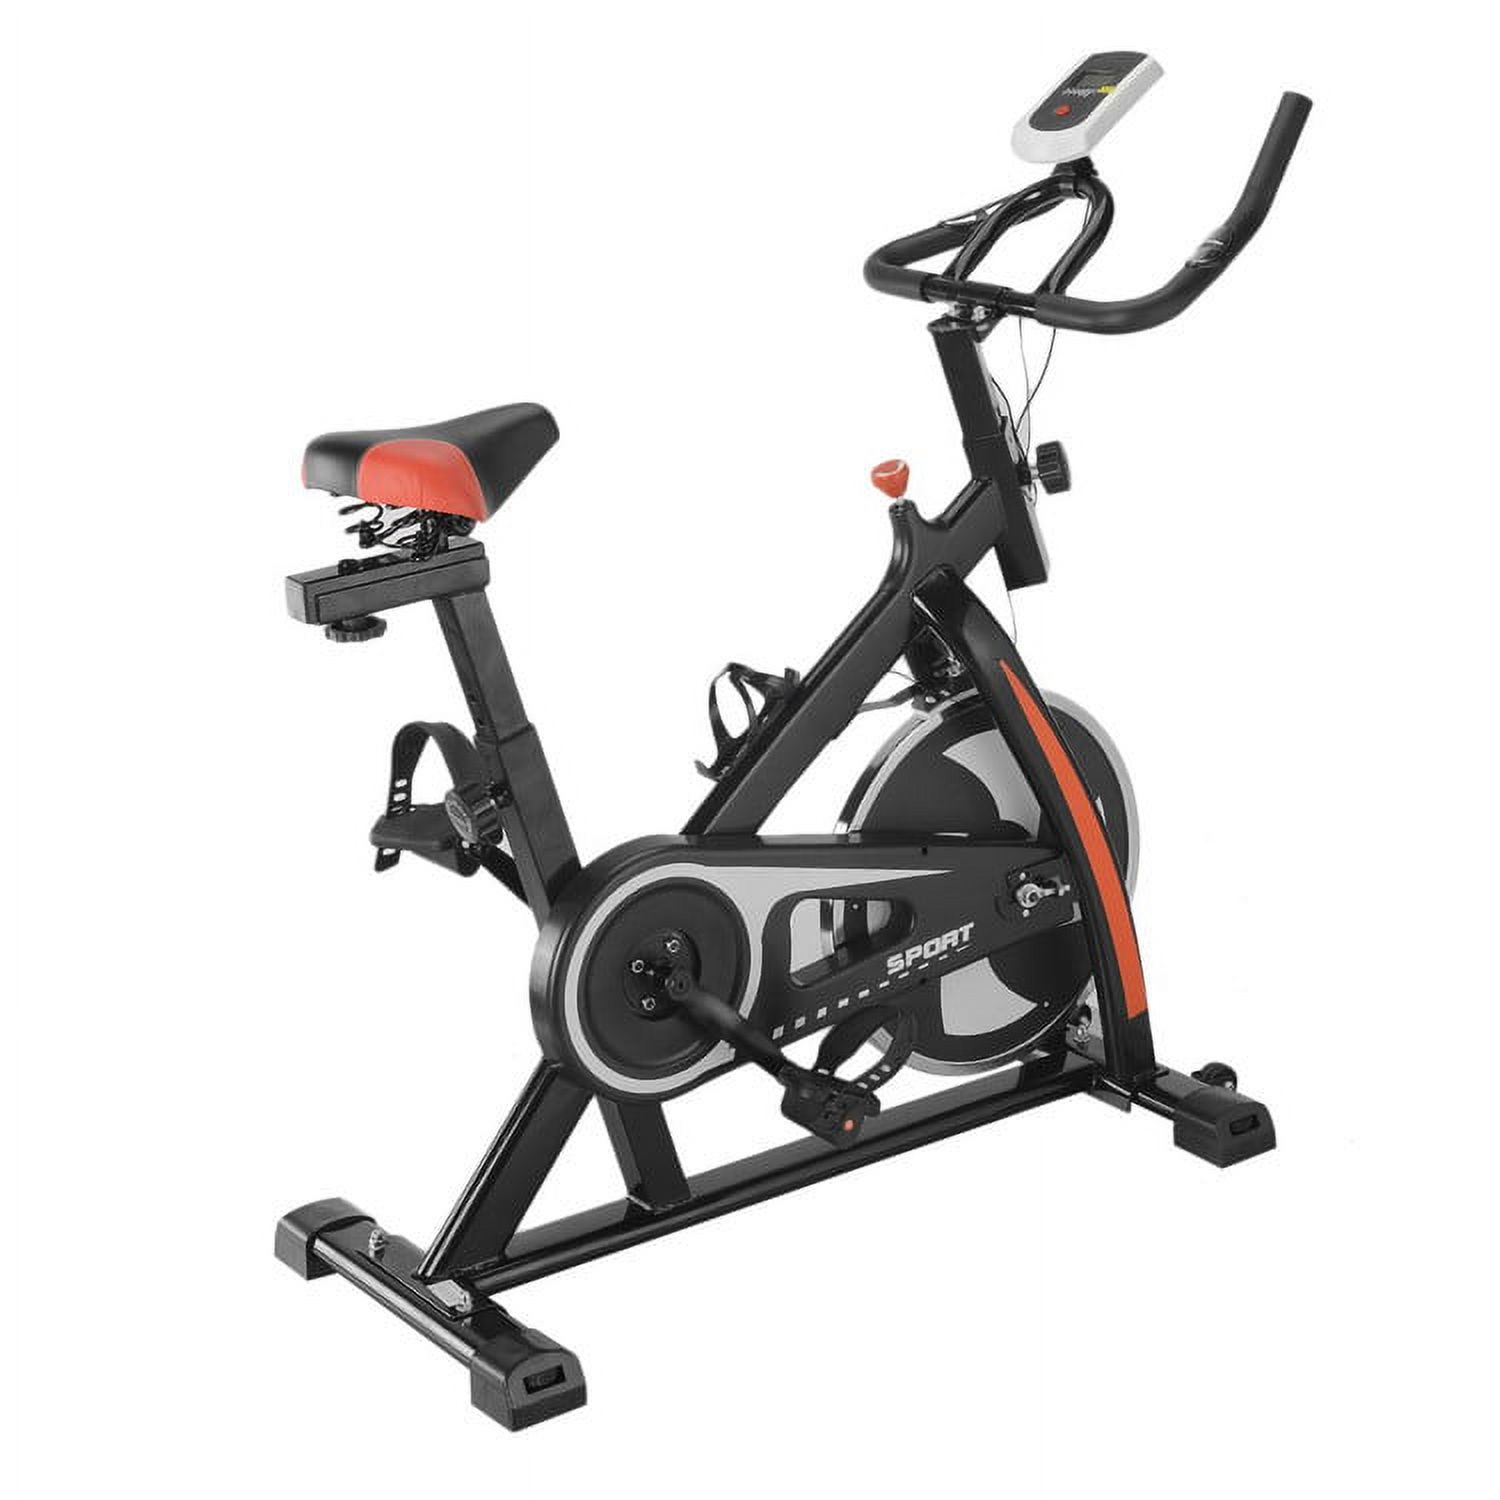 Indoor Cycling Trainer Exercise Bike Cycling Twisting Mini Exercise Bike Equipment (Black) - image 3 of 4